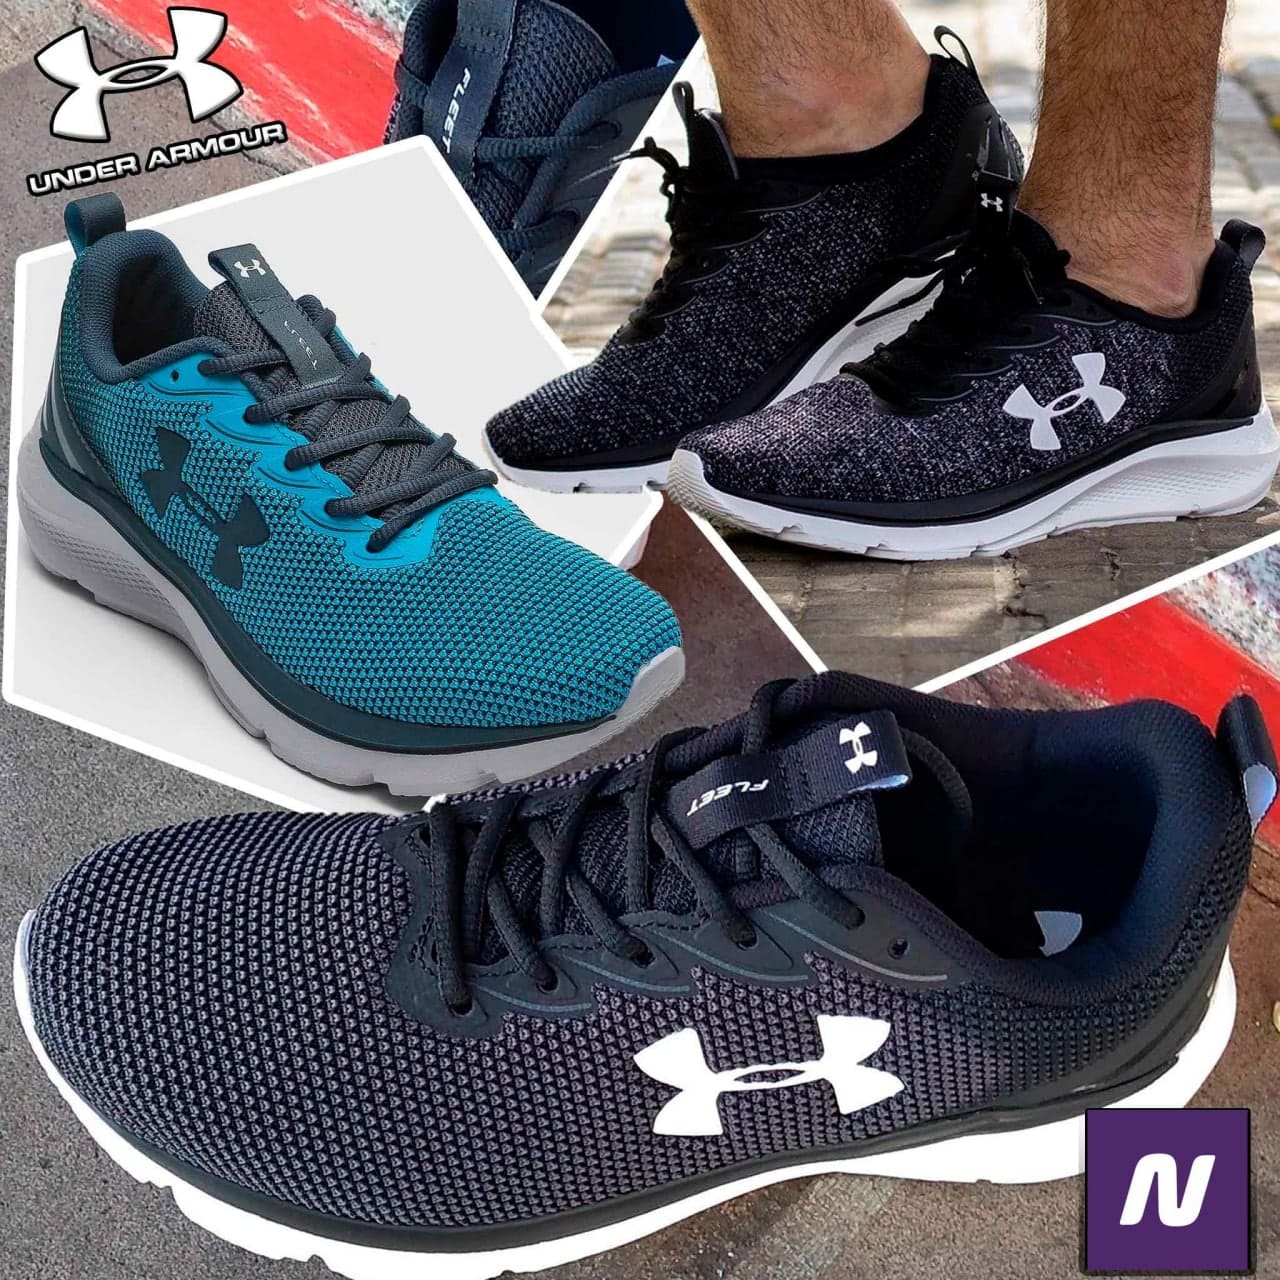 Tênis Under Armour Charged Fleet Masculino na Netshoes